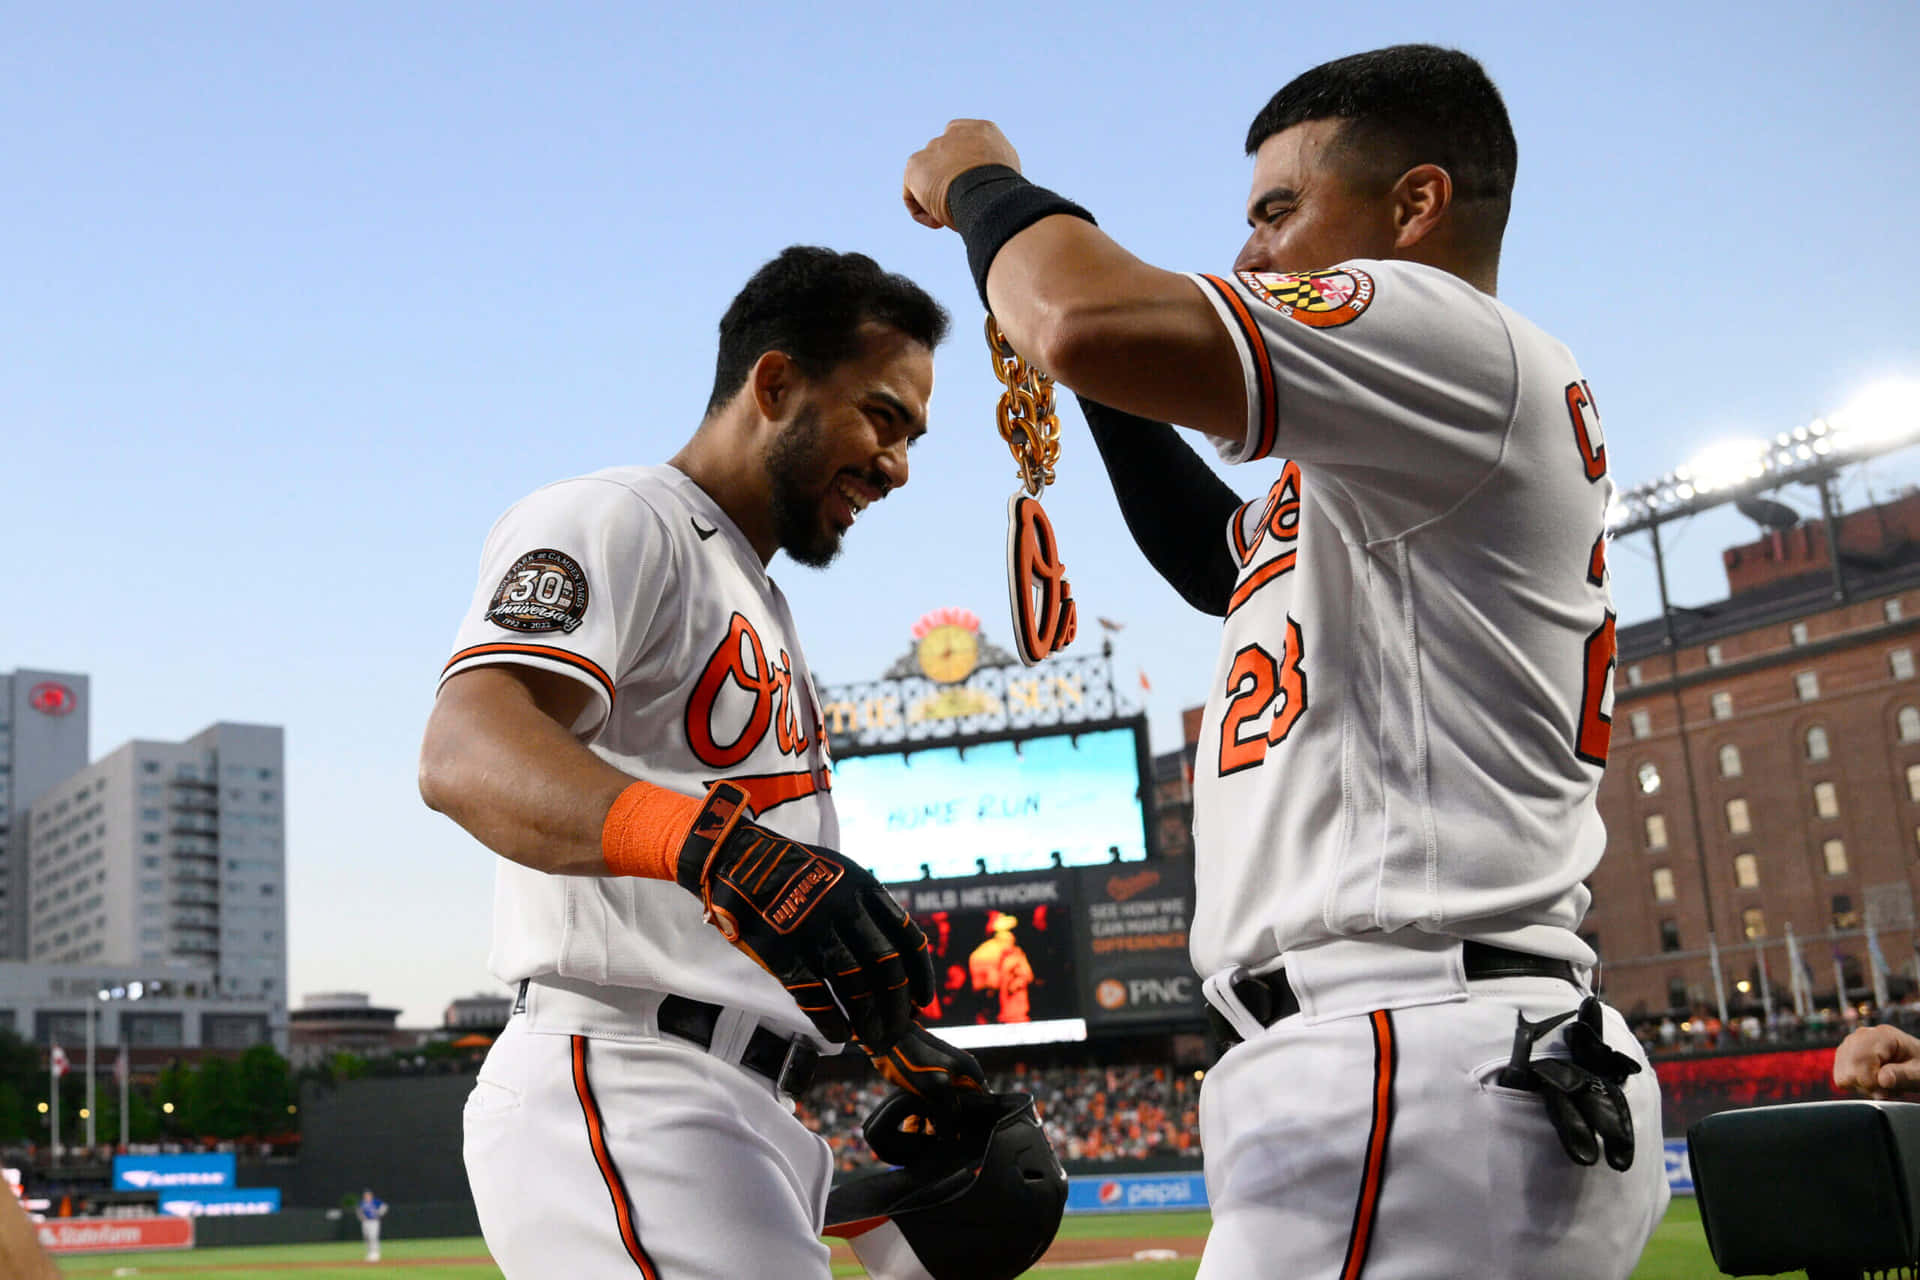 Orioles Players Celebrating Victory Wallpaper